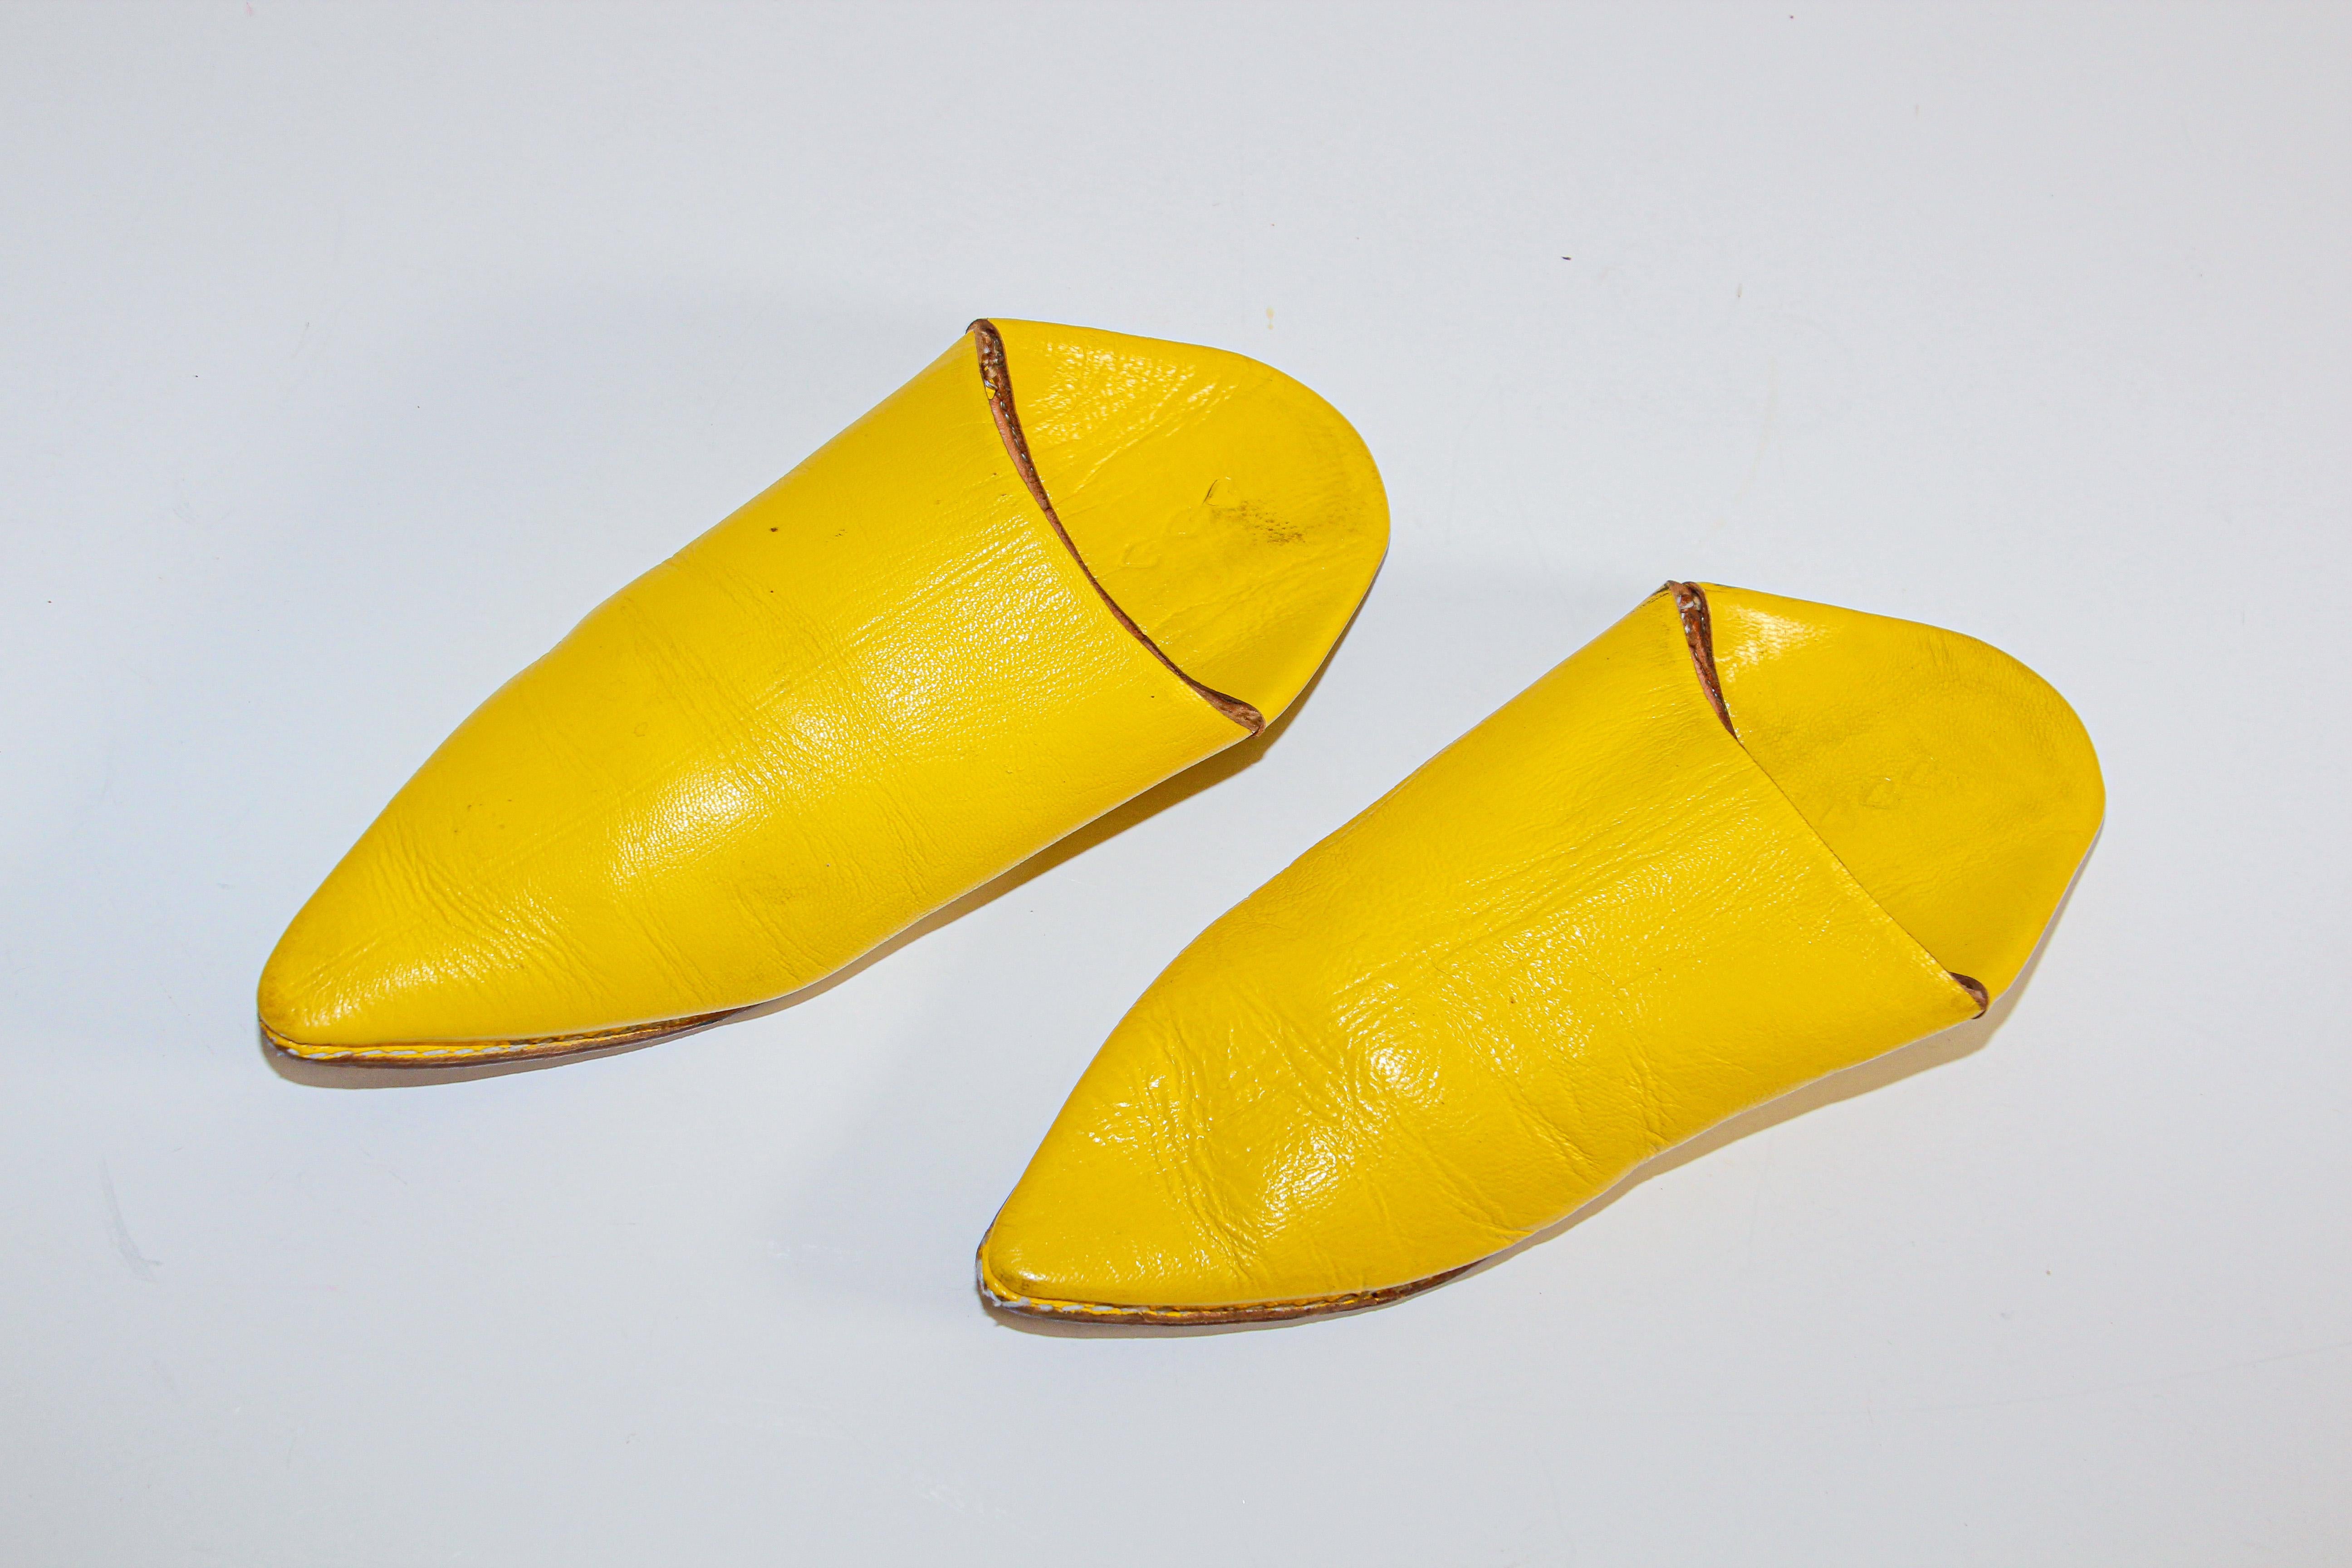 Moroccan yellow leather slippers are handmade to perfection the inside sole is crafted of soft leather.
Hand-sewn sole and handcrafted in Fez Morocco. 
You won't want to take the Moroccan babouches off your feet.
vintage Moroccan shoes to wear